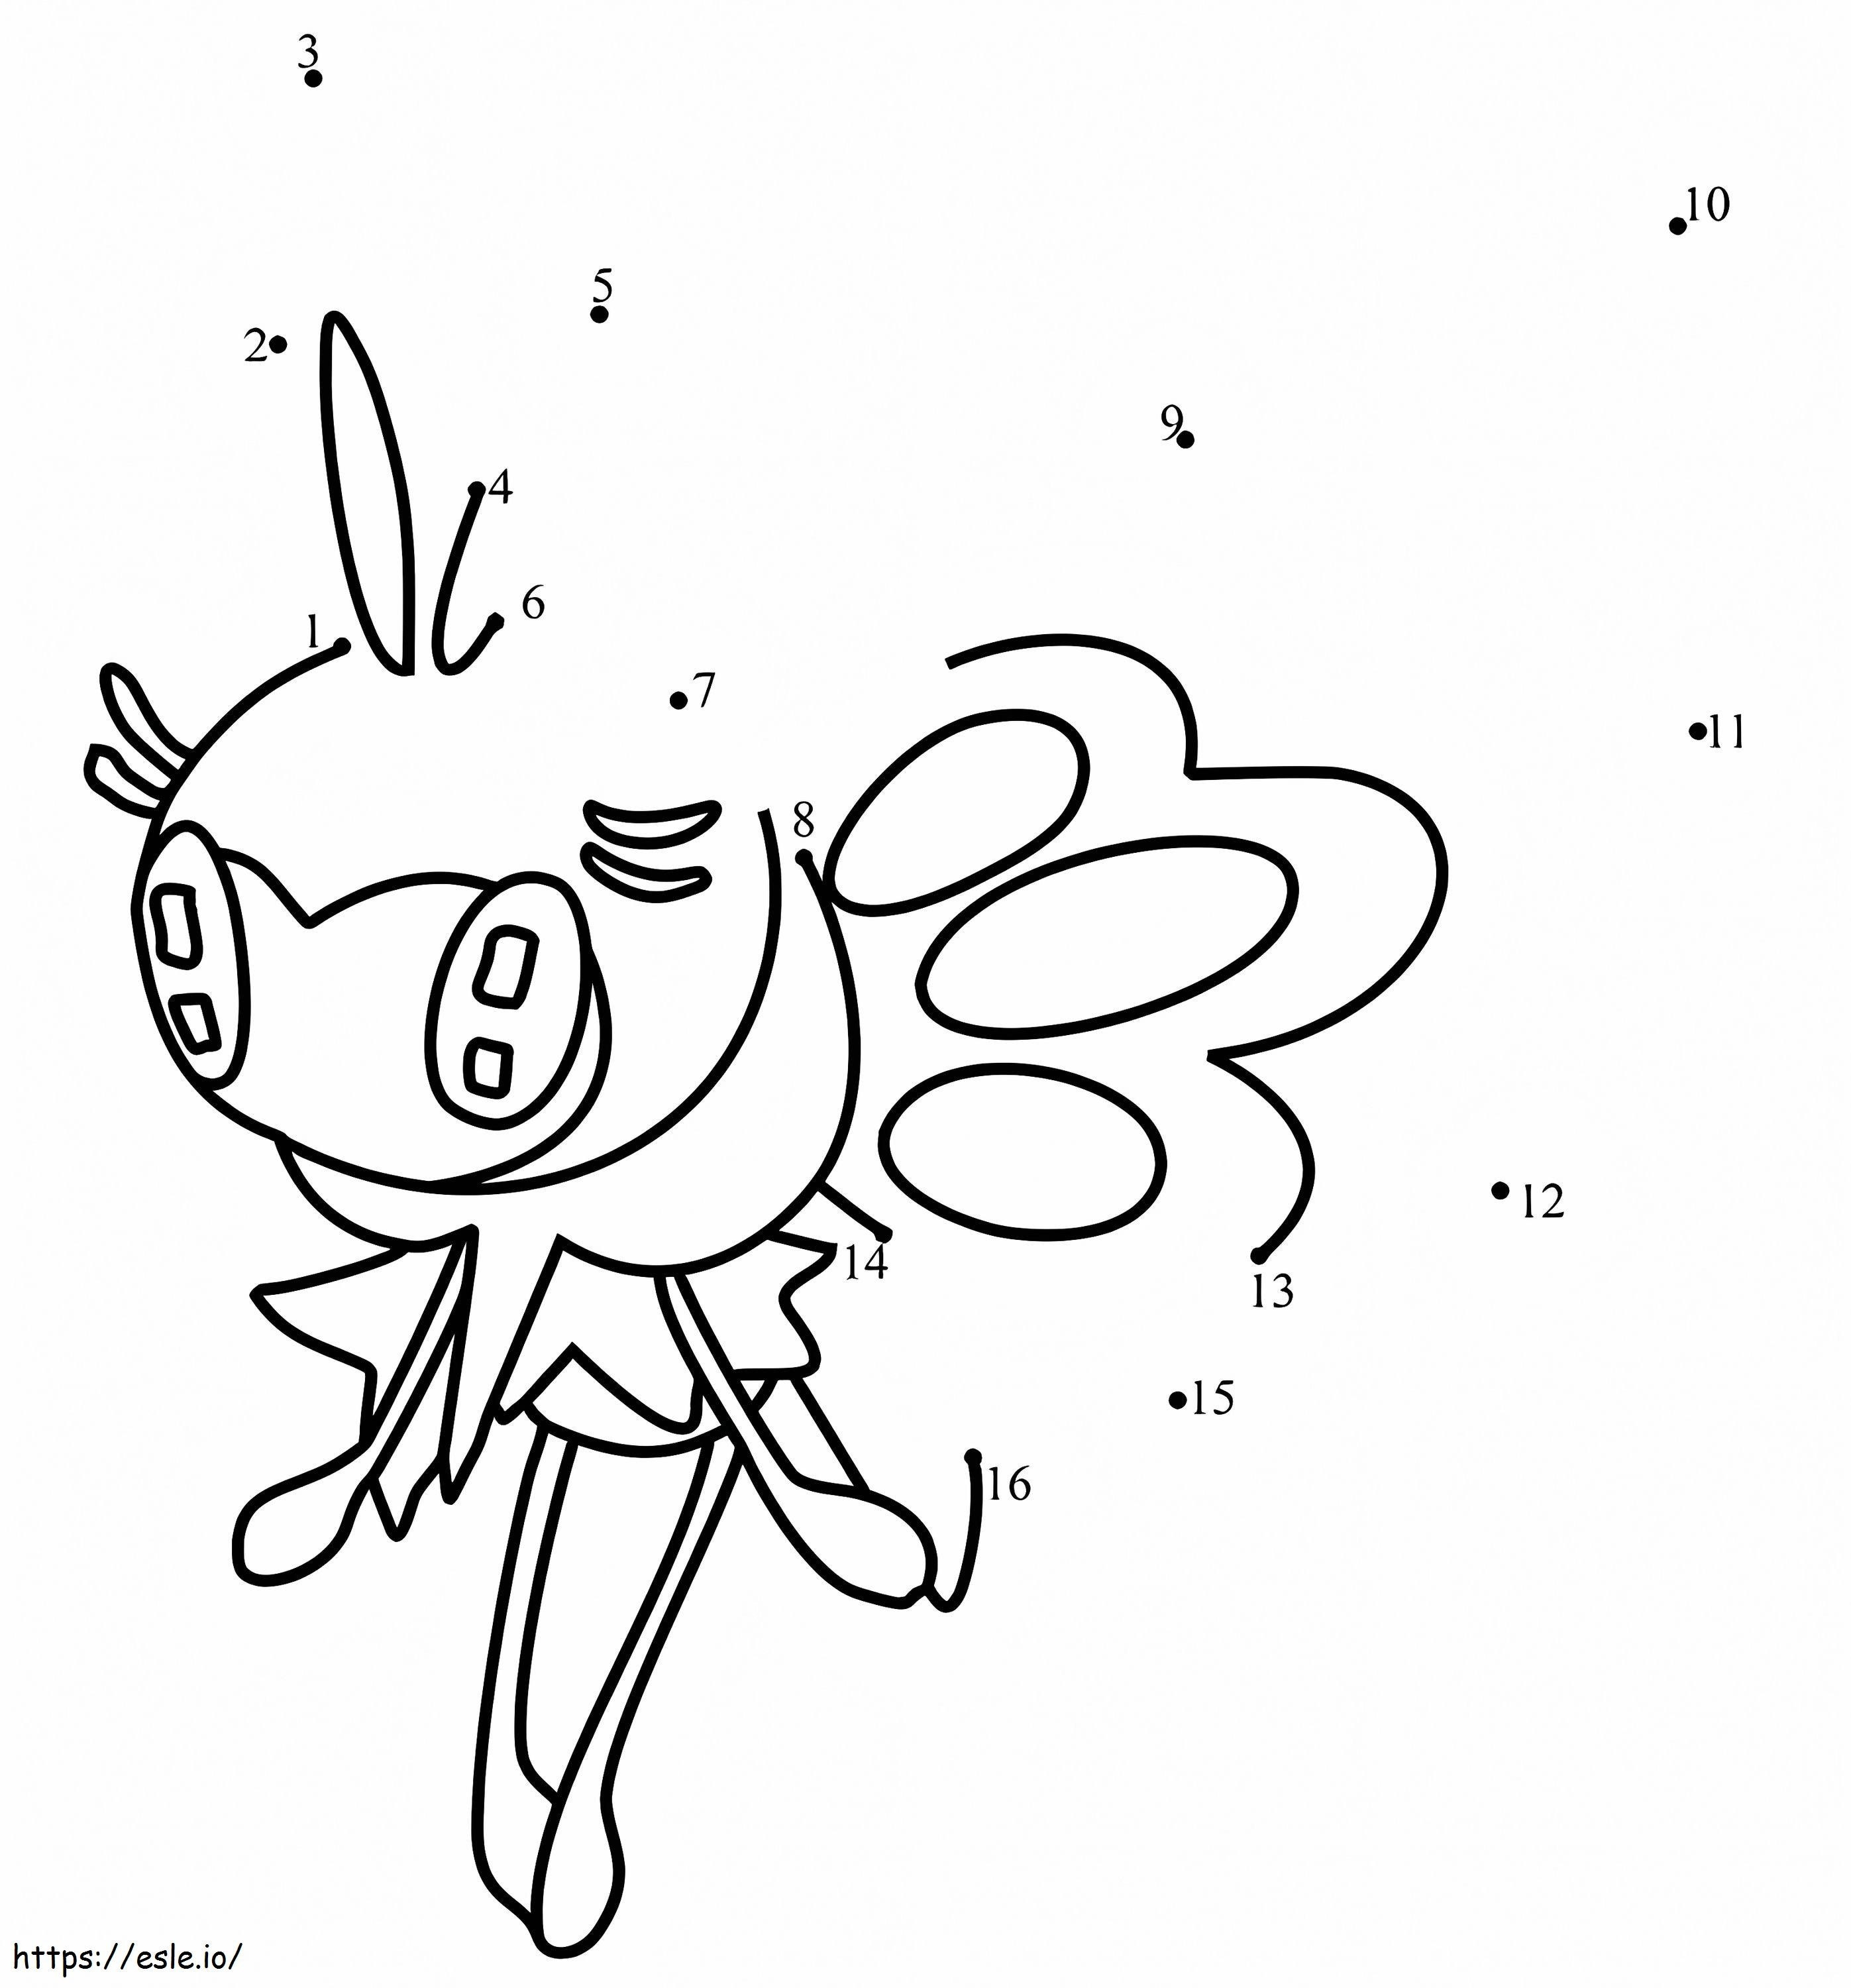 Ribombee Dot To Dot coloring page